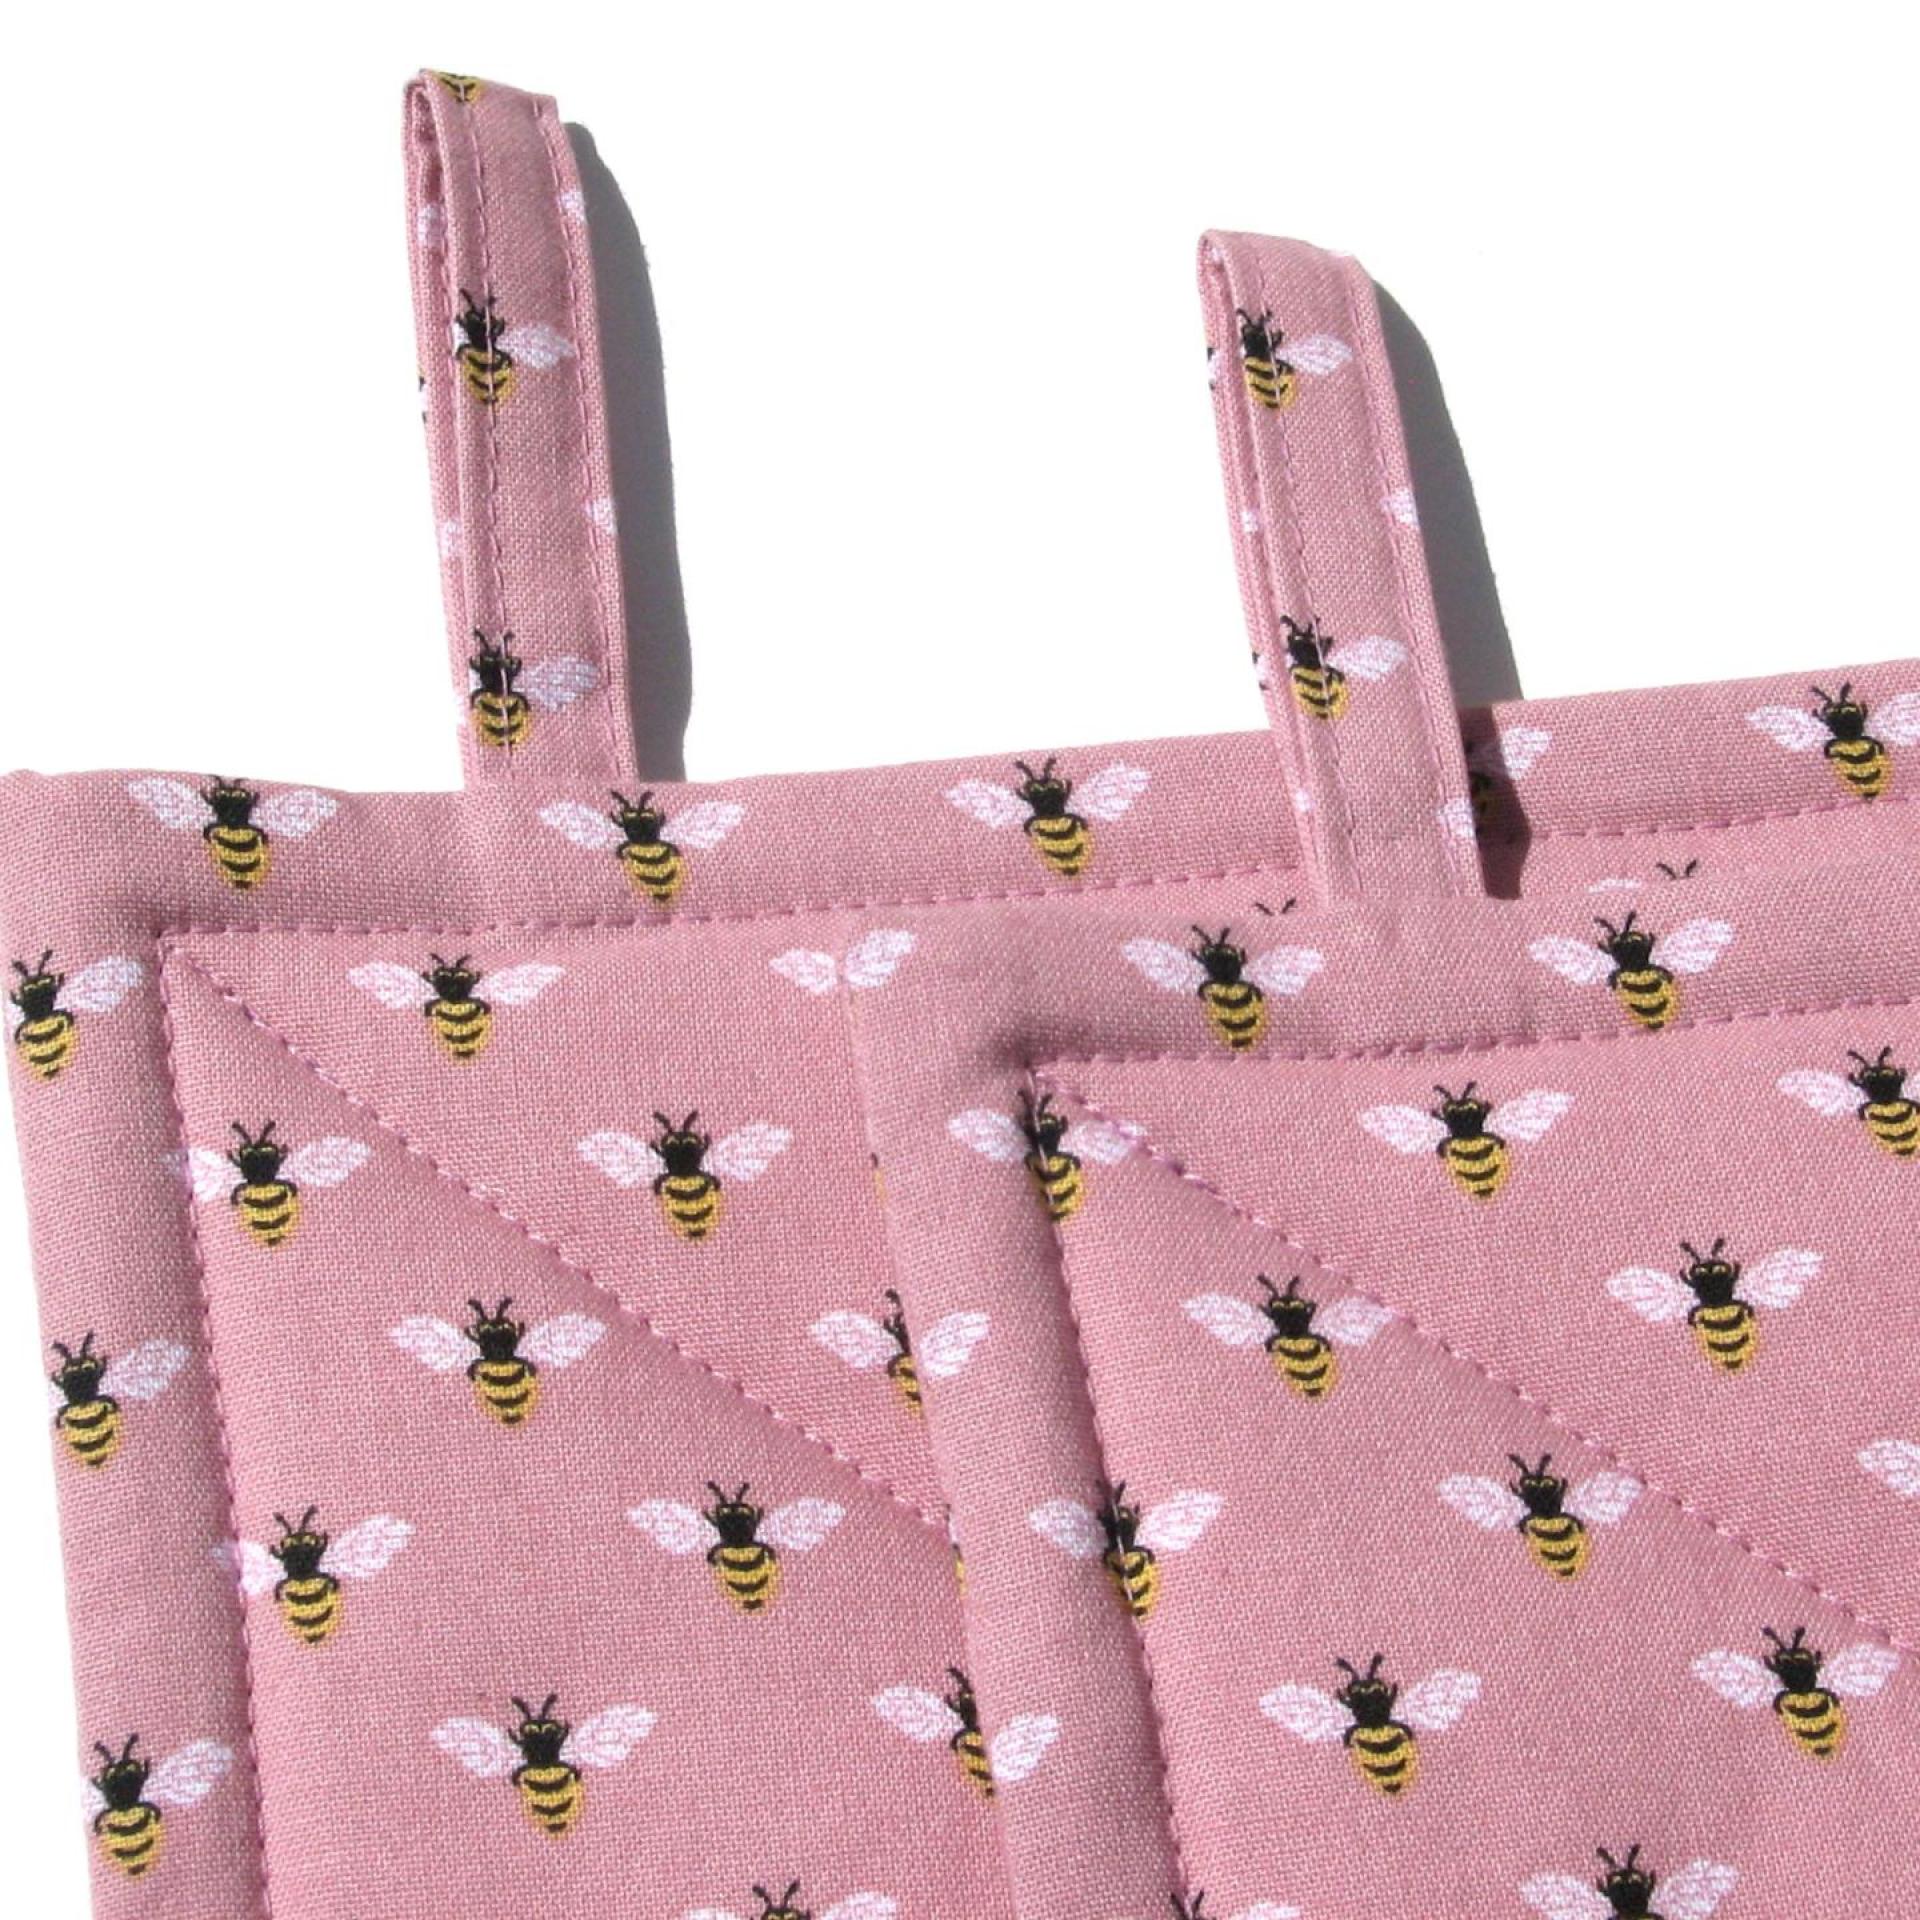 Potholders with Bees on a Dusty Pink Background, Quilted Handmade Hot Pads, Mother's Day or Beekeeper Gift 